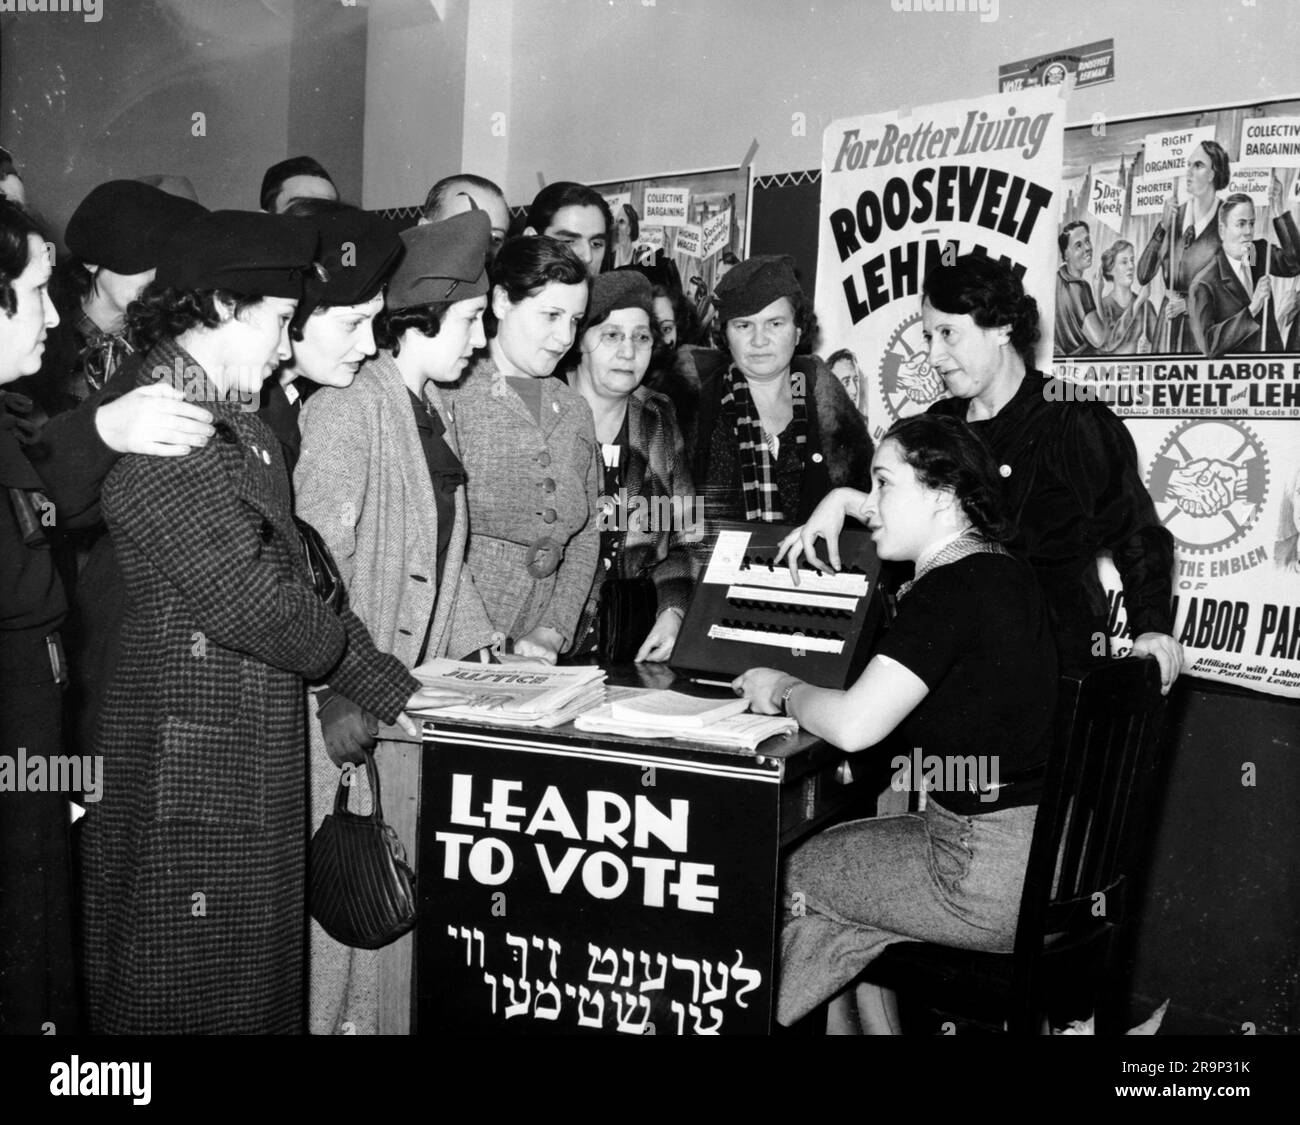 Women surrounded by posters in English and Yiddish supporting Franklin D. Roosevelt, Herbert H. Lehman, and the American Labor Party teach other women how to vote, 1935. Stock Photo